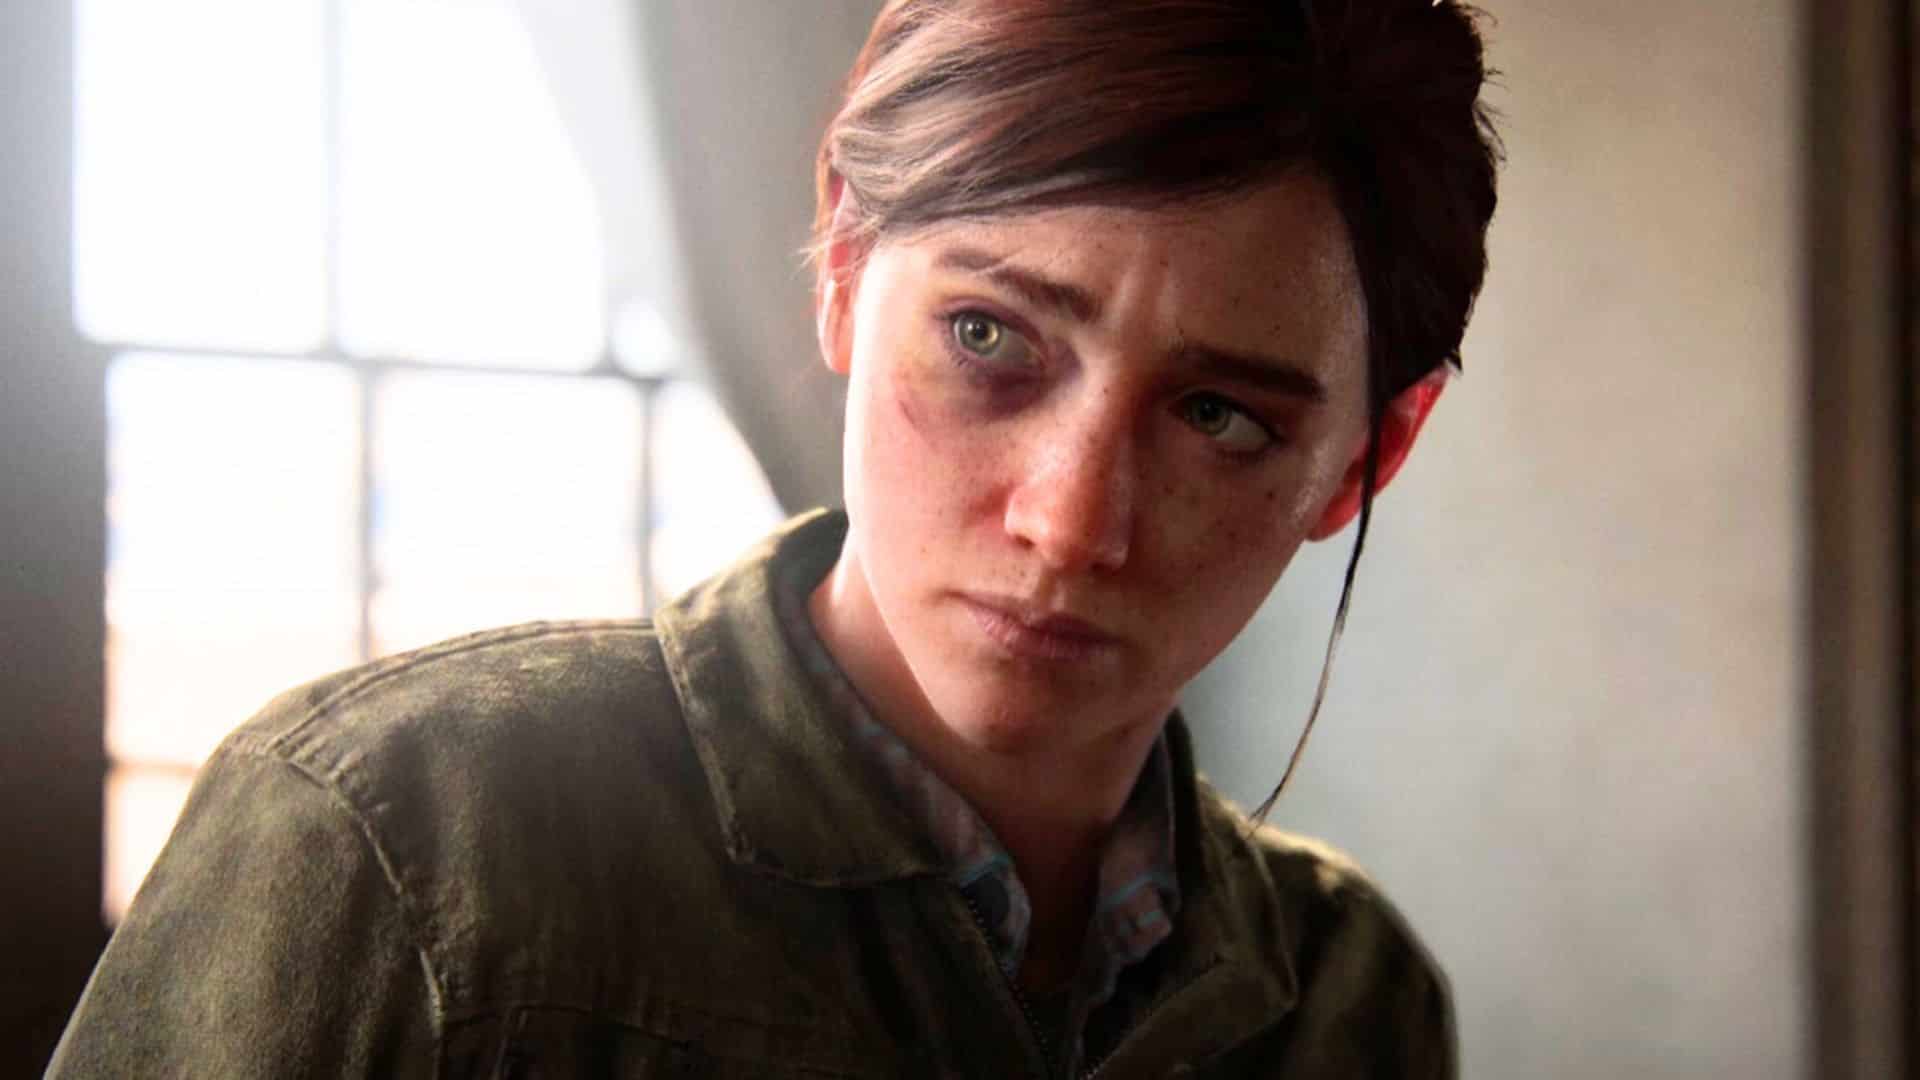 The Last of Us Part 2 Remastered release date, pre-order, price